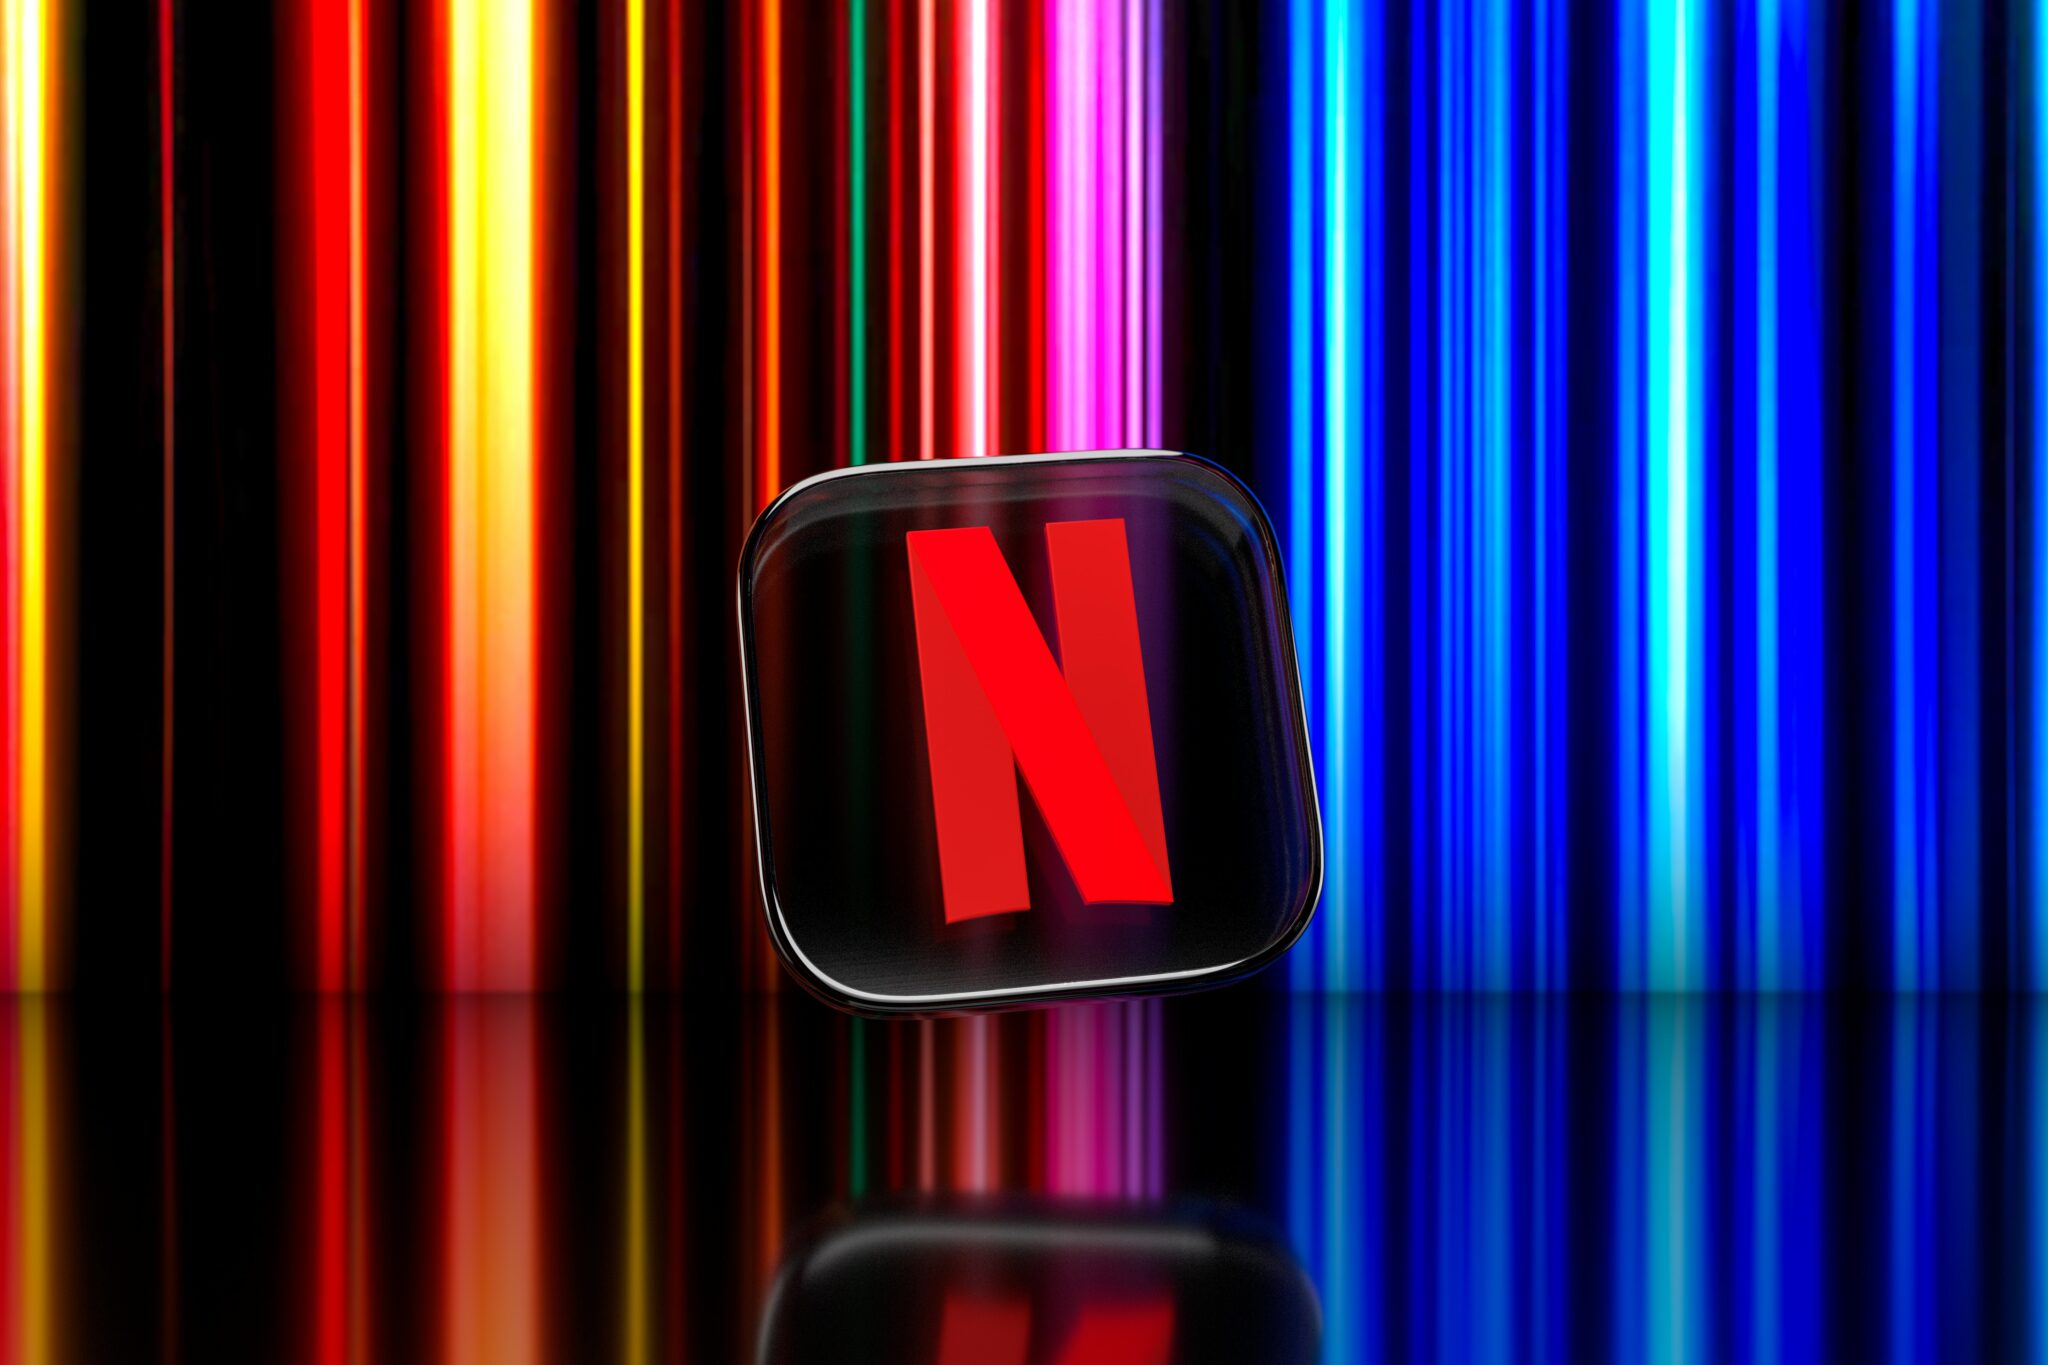 Netflix will no longer allow you to share your password for free